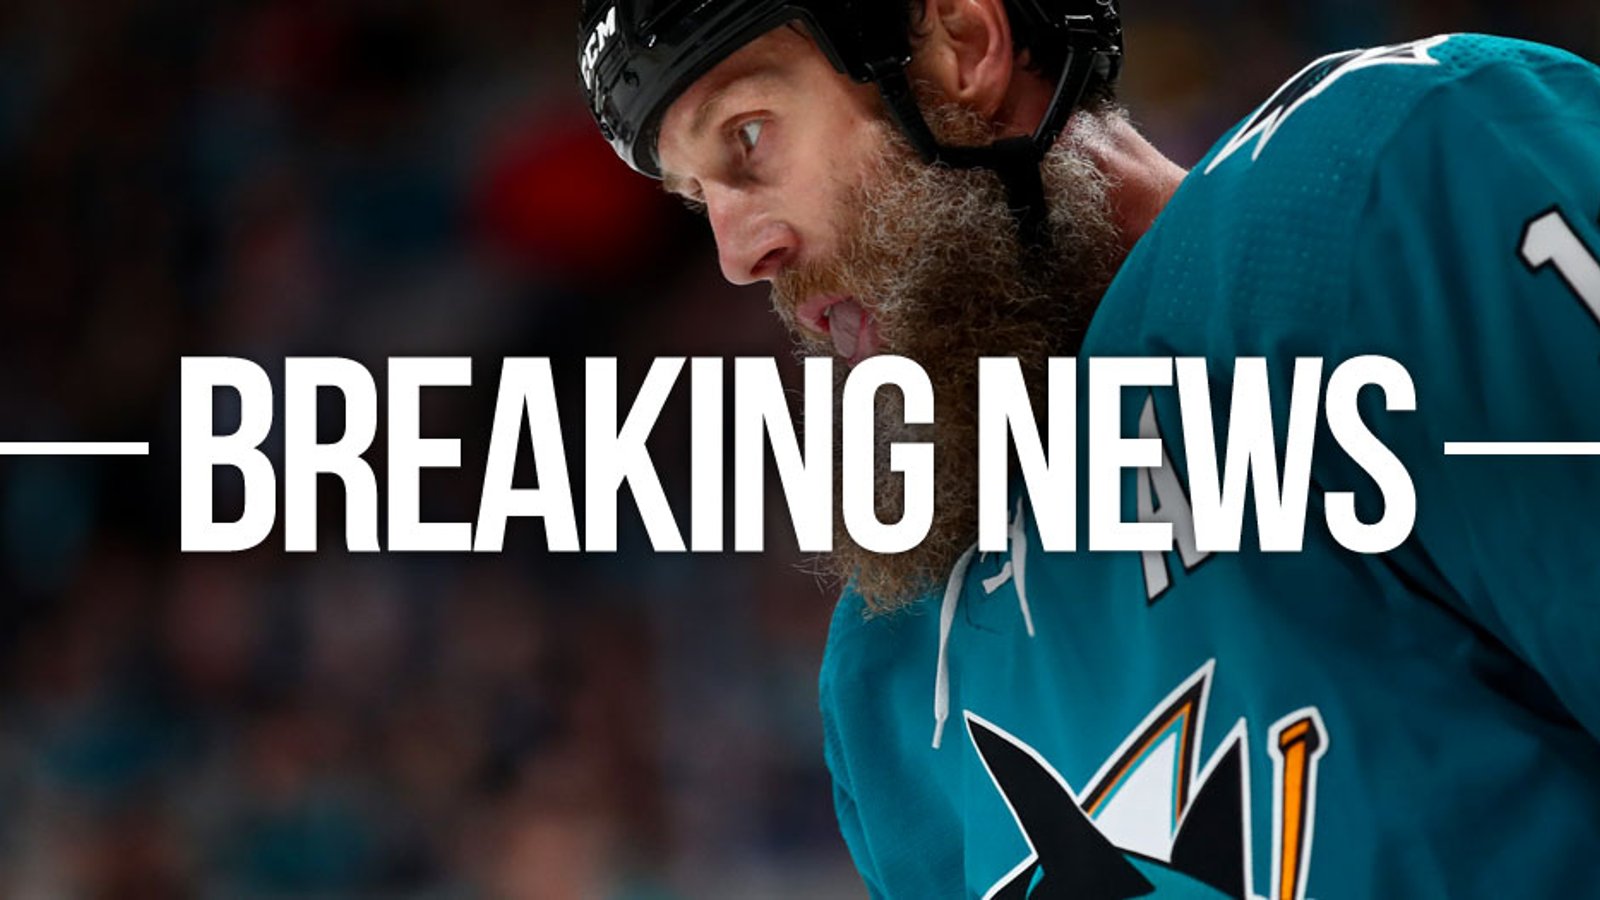 Joe Thornton has signed with the Maple Leafs! 